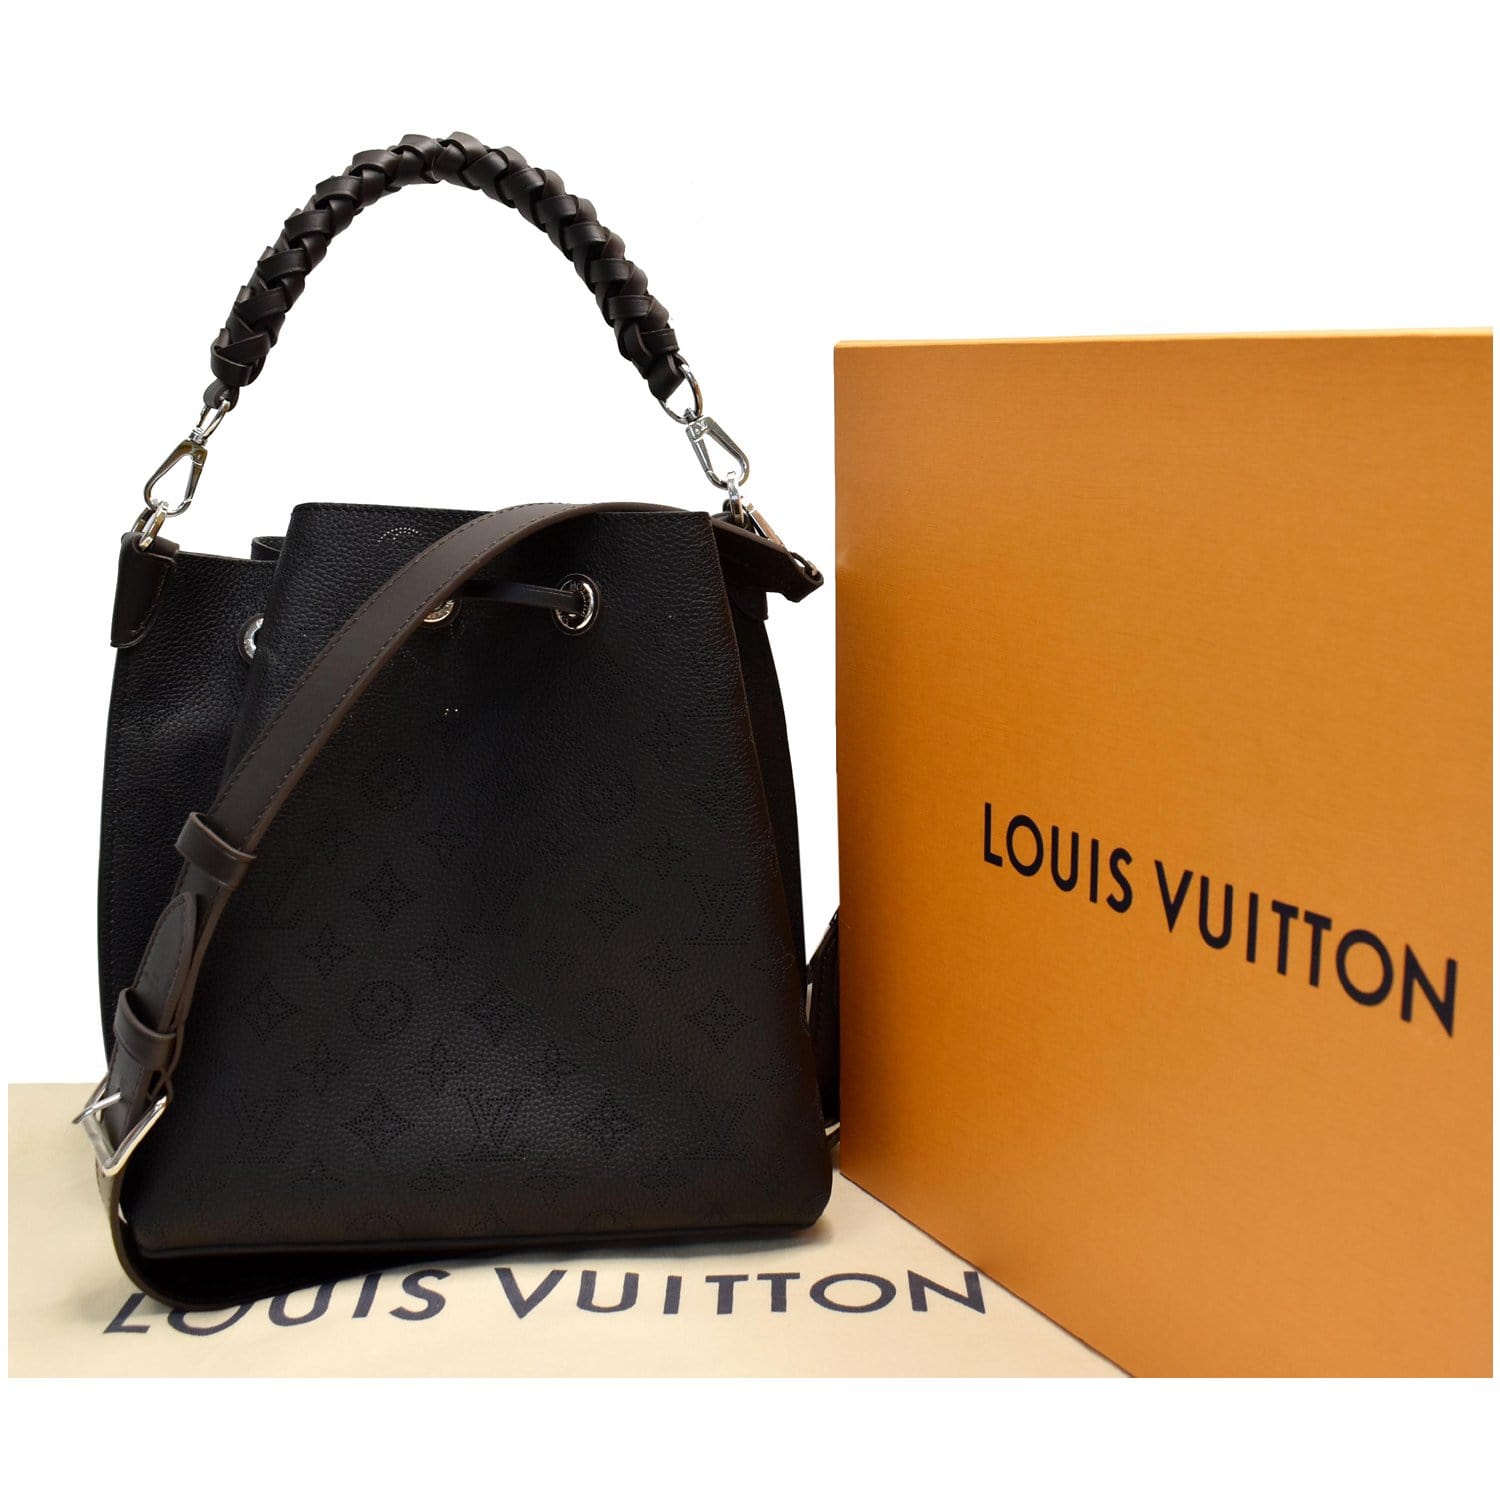 Authentic Louis Vuitton Black Mahina Perforated Calfskin Leather